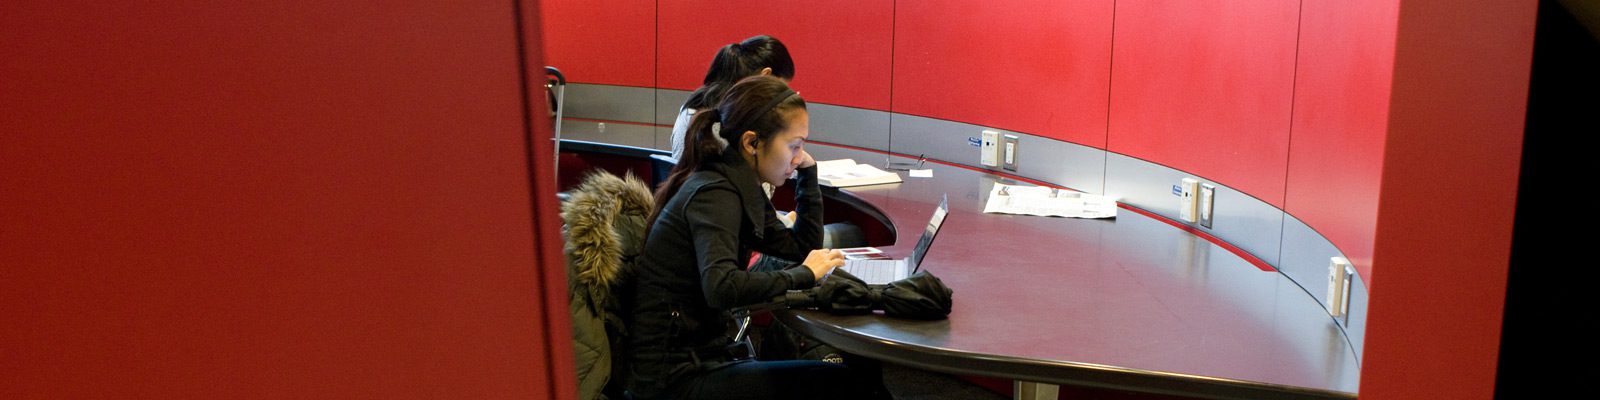 two students looking at laptops in a red walled room on a silver table.